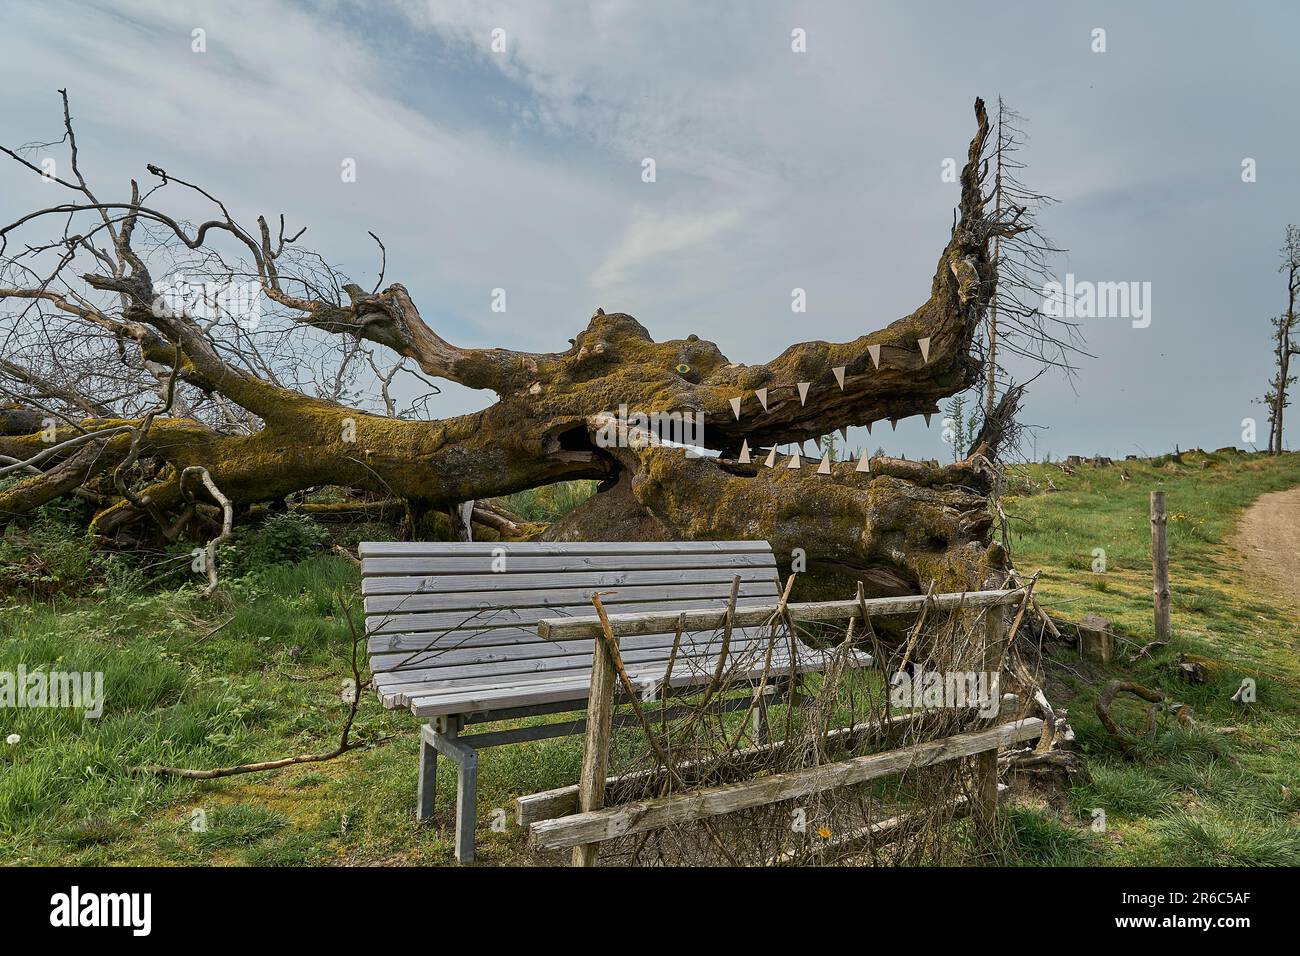 old fallen tree trunk turned into a sculpture of a dragon along a hiking trail in the Rothaarsteig mountains leading through heavily deforested area. Stock Photo